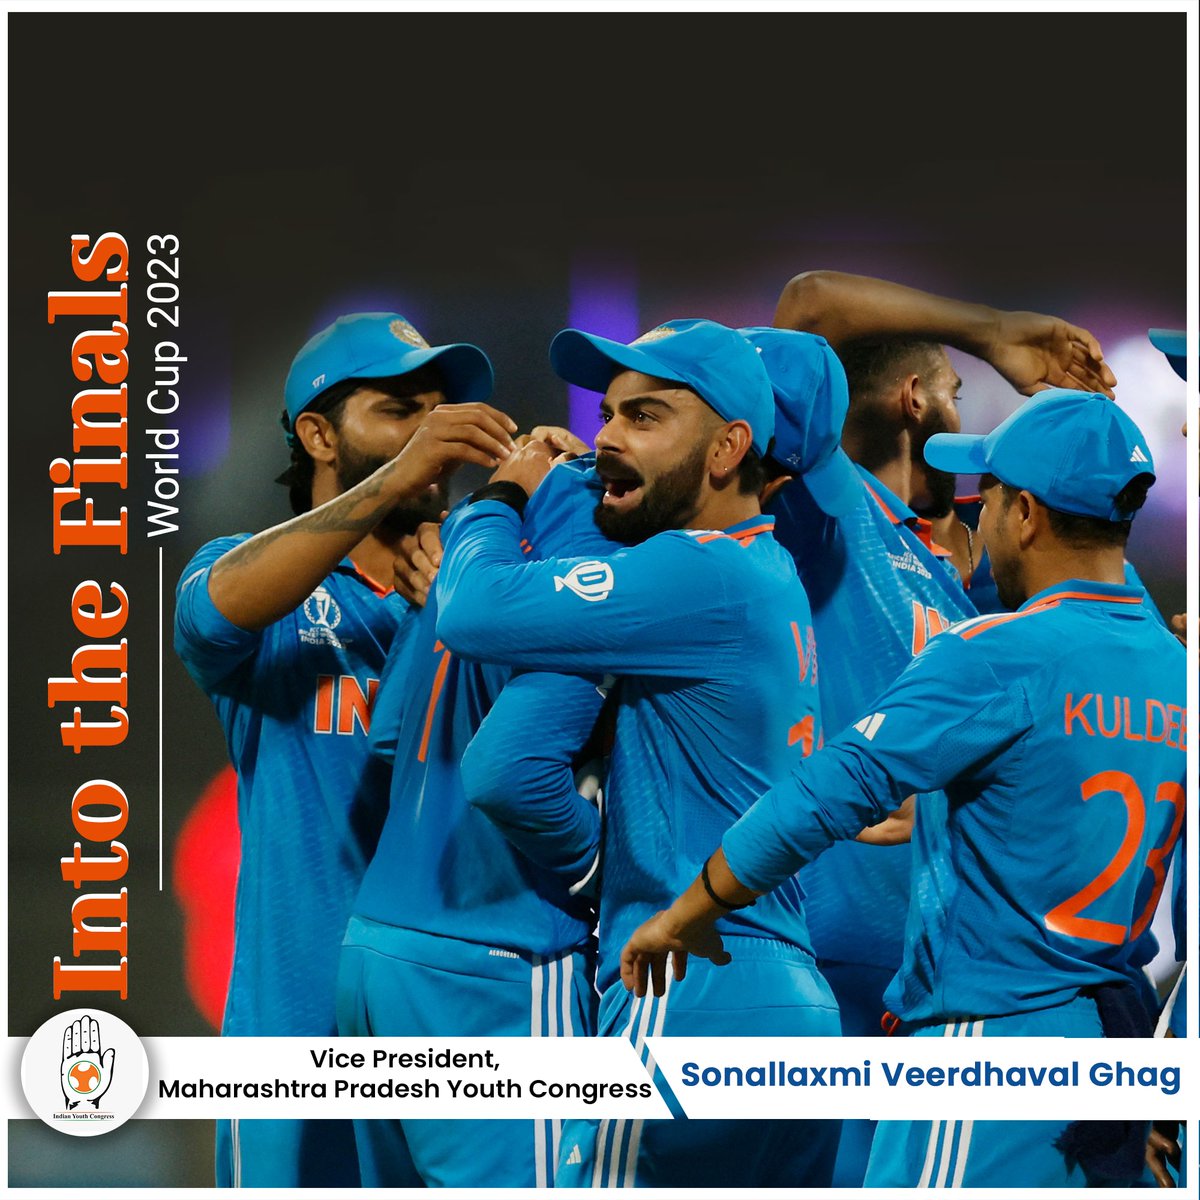 'Victory echoes across the pitch as Team India triumphs in the ODI World Cup semi-final! 🇮🇳🏏 #CricketGlory #TeamIndia'